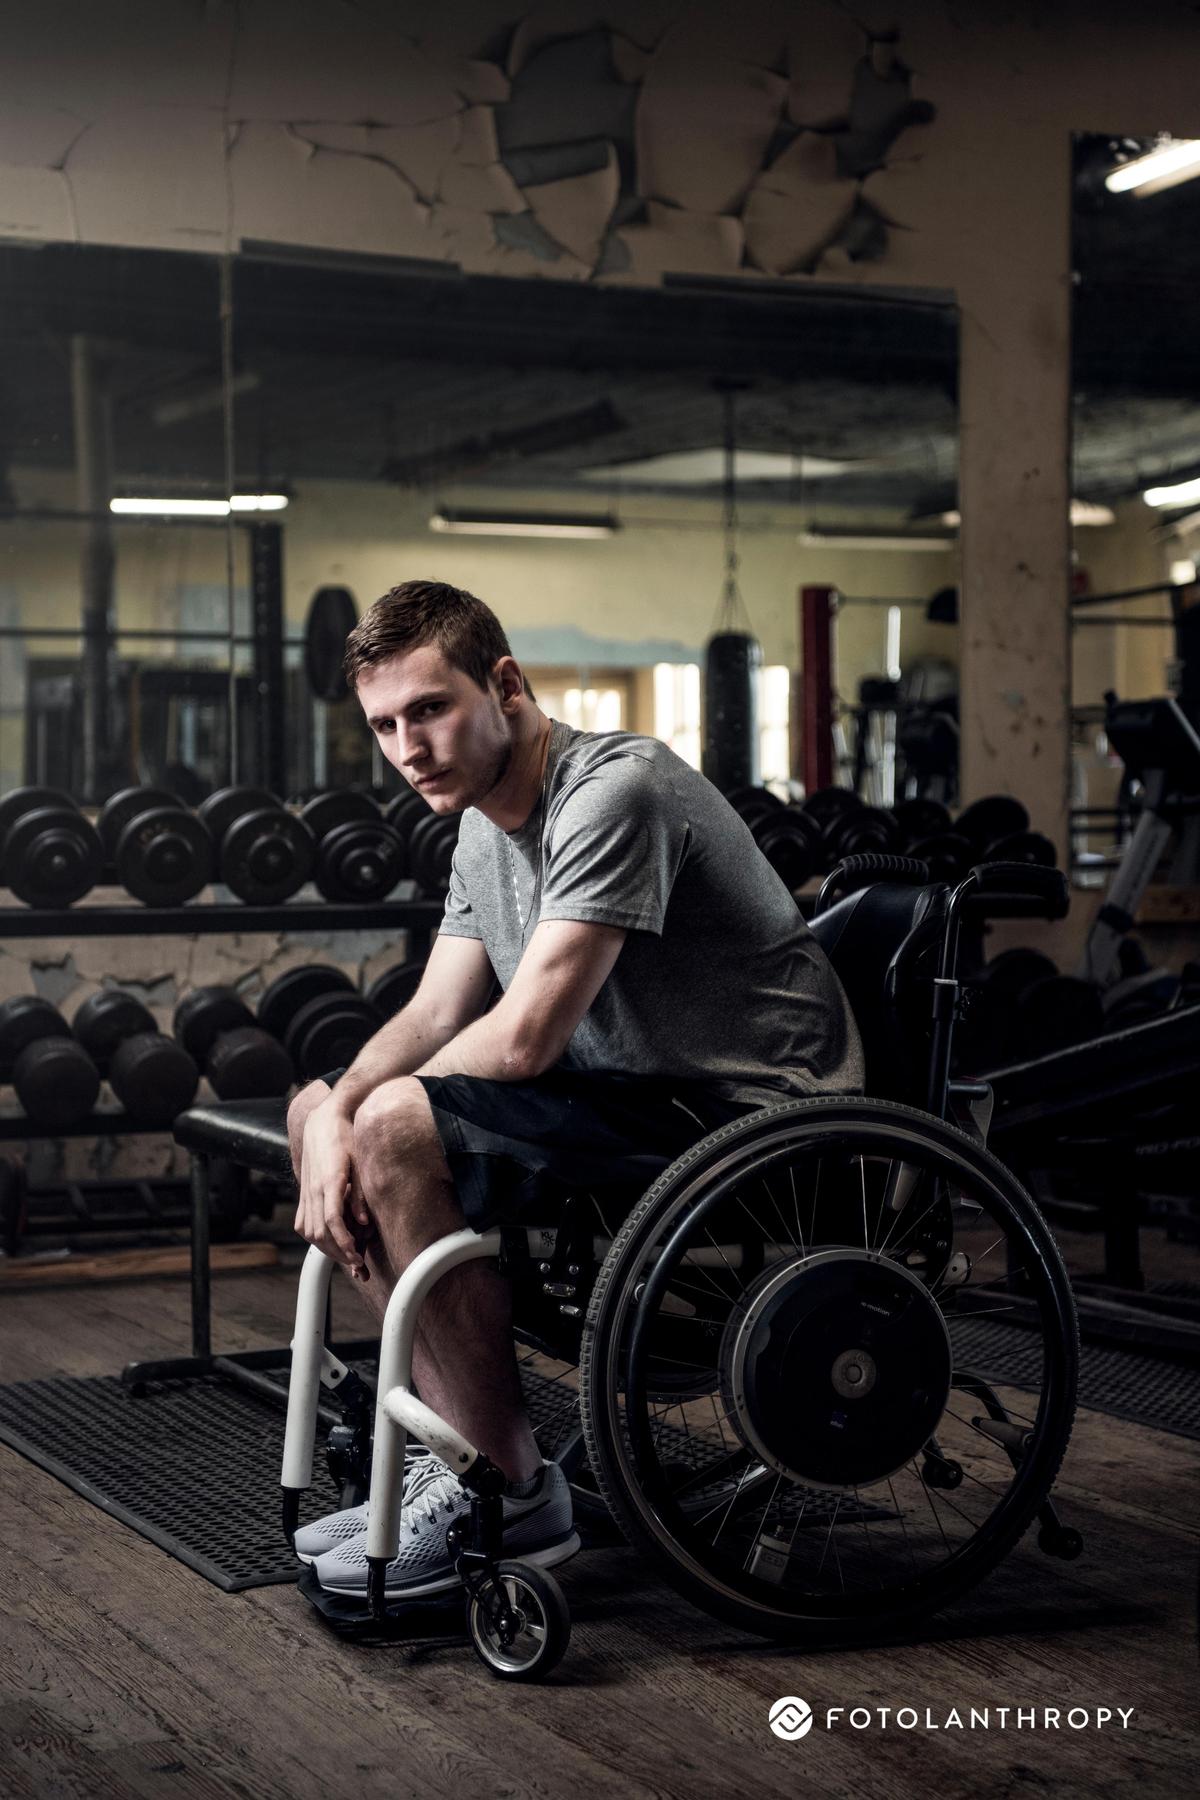  Chris Norton became confined to a wheelchair after a college football accident left him paralyzed below the neck. (Courtesy of Sean Berry/Fotolanthropy)